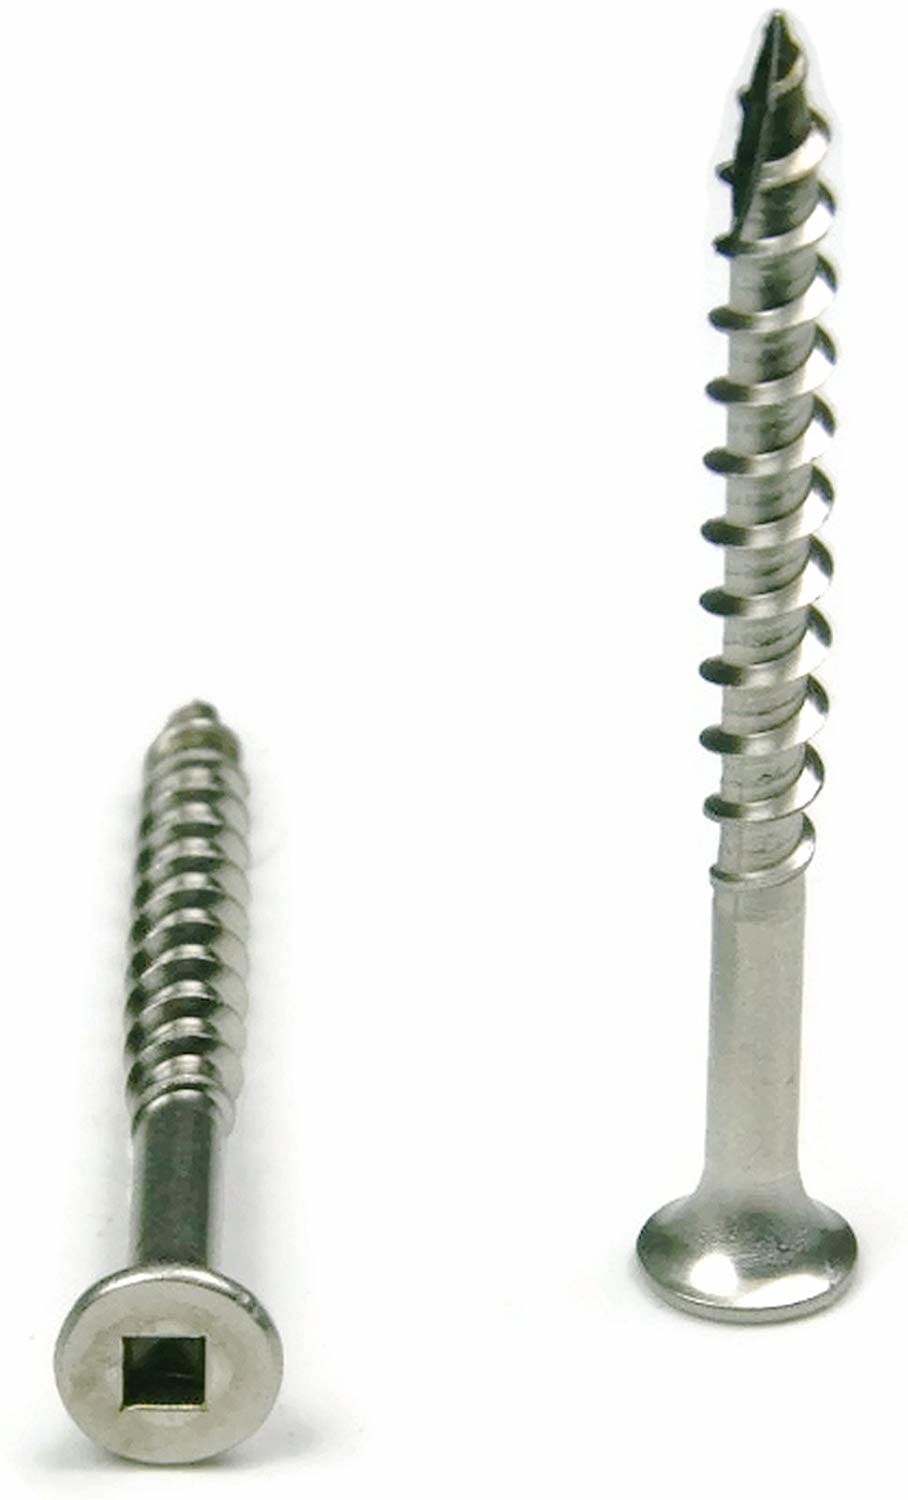 #14 x 2-1/2" Stainless Steel Wood Screw Square Drive, Bugle Head (Quantity: 100) Type 17 Wood Cutting Point, 1-3/4" of Thread Length, #14 Screw Diameter, 2-1/2" Screw Length - image 1 of 1